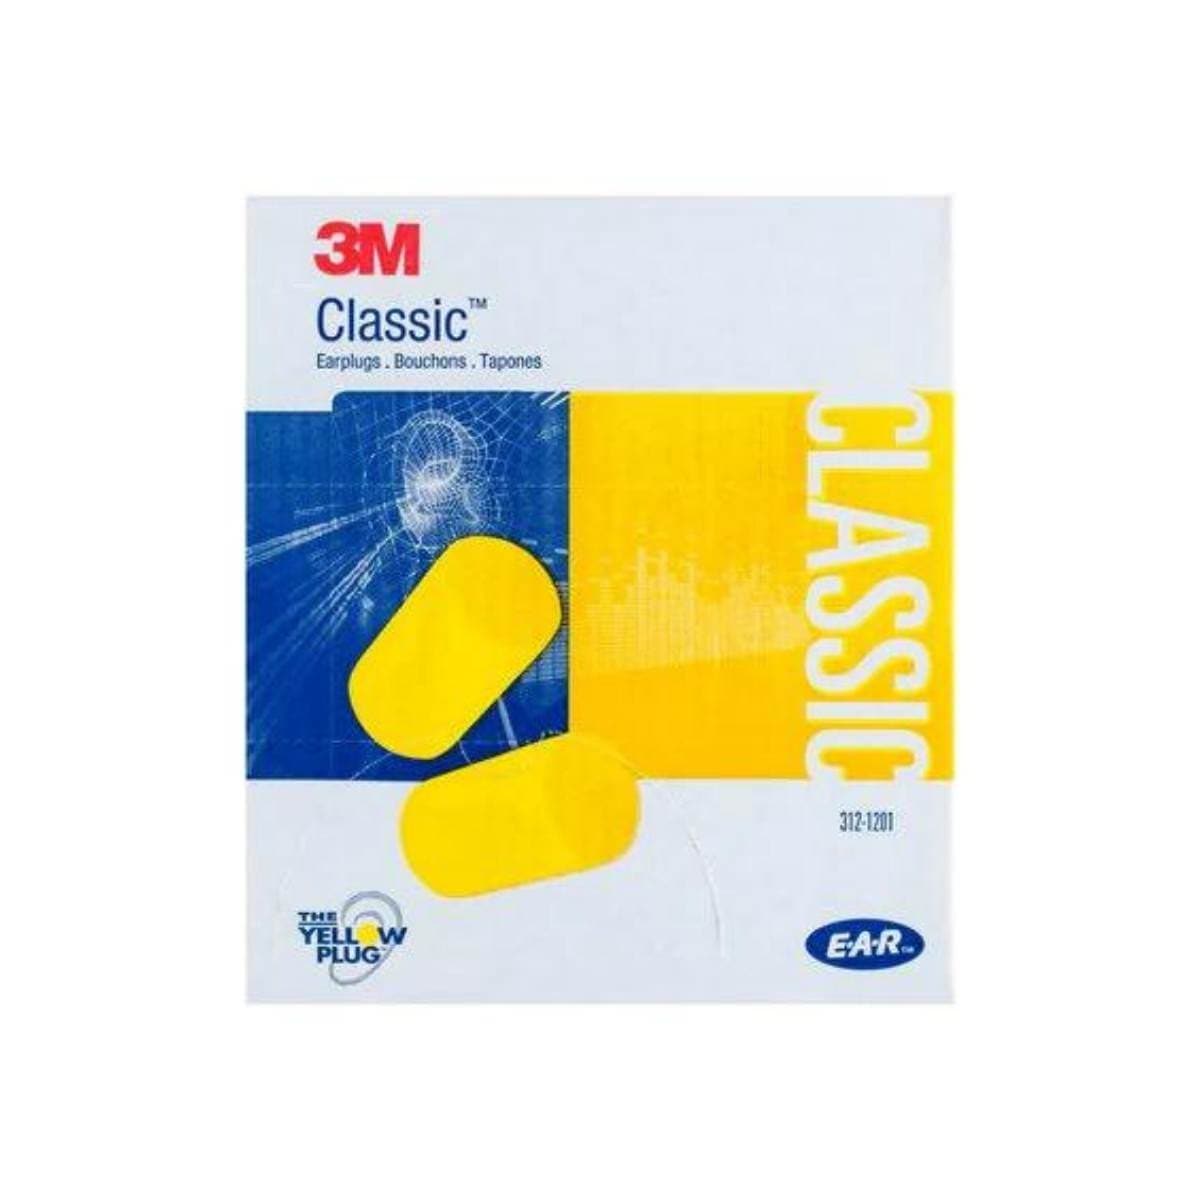 3M™ E-A-R™ Classic™ Uncorded Earplugs, Poly Bag 312-1201, Uncorded - 23dB (Class 4) (Box of 200)